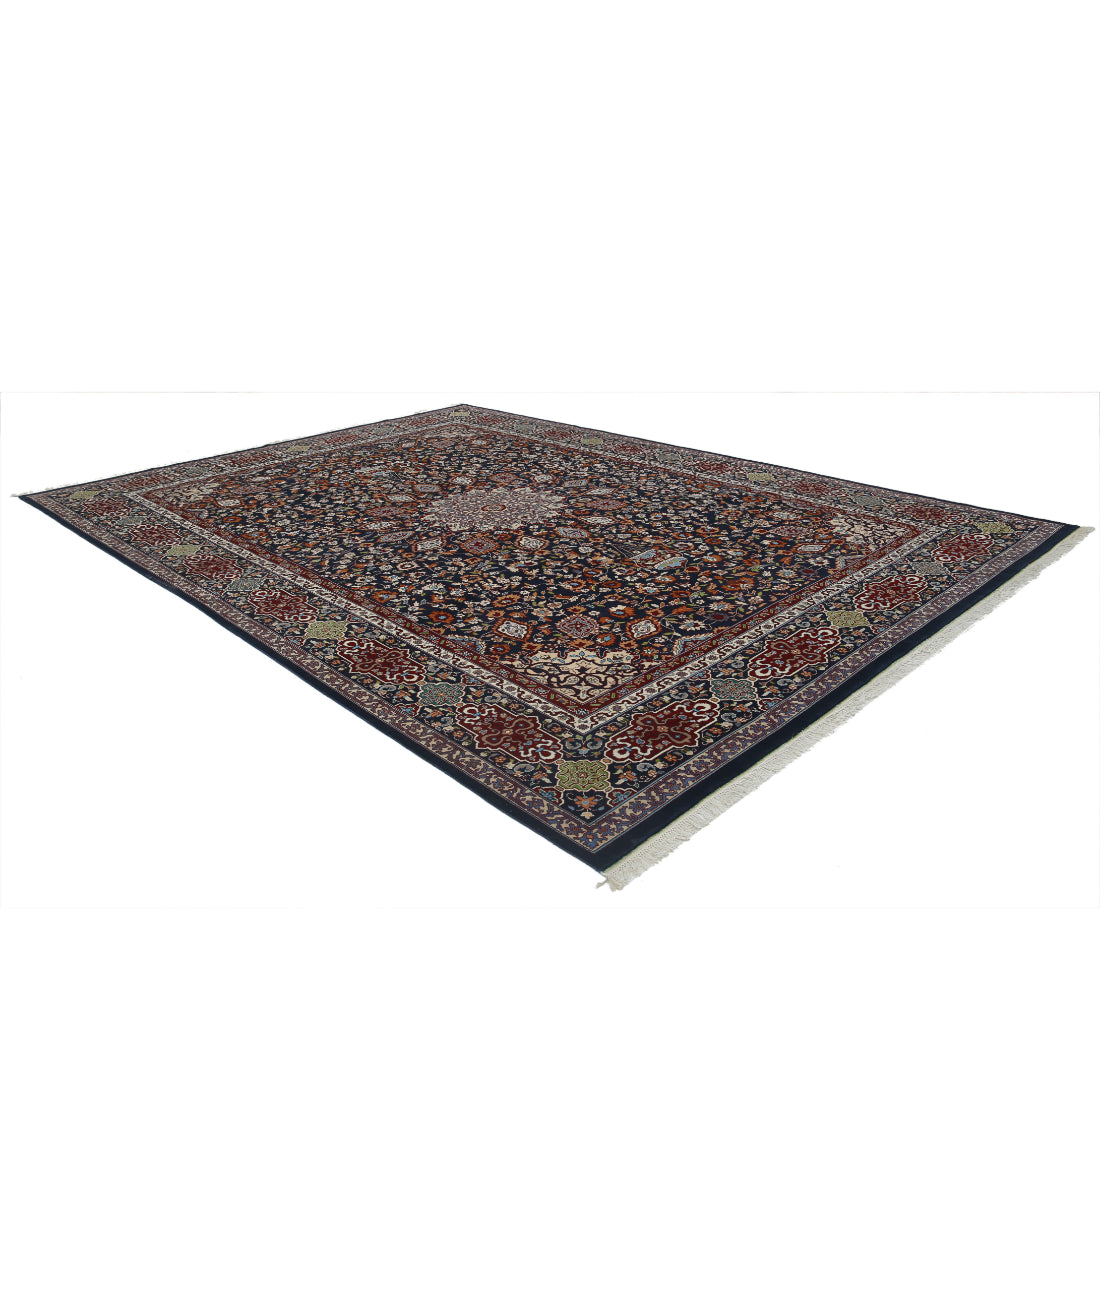 Hand Knotted Persian Tabriz Wool Rug - 9'11'' x 13'9'' 9'11'' x 13'9'' (298 X 413) / Blue / Red